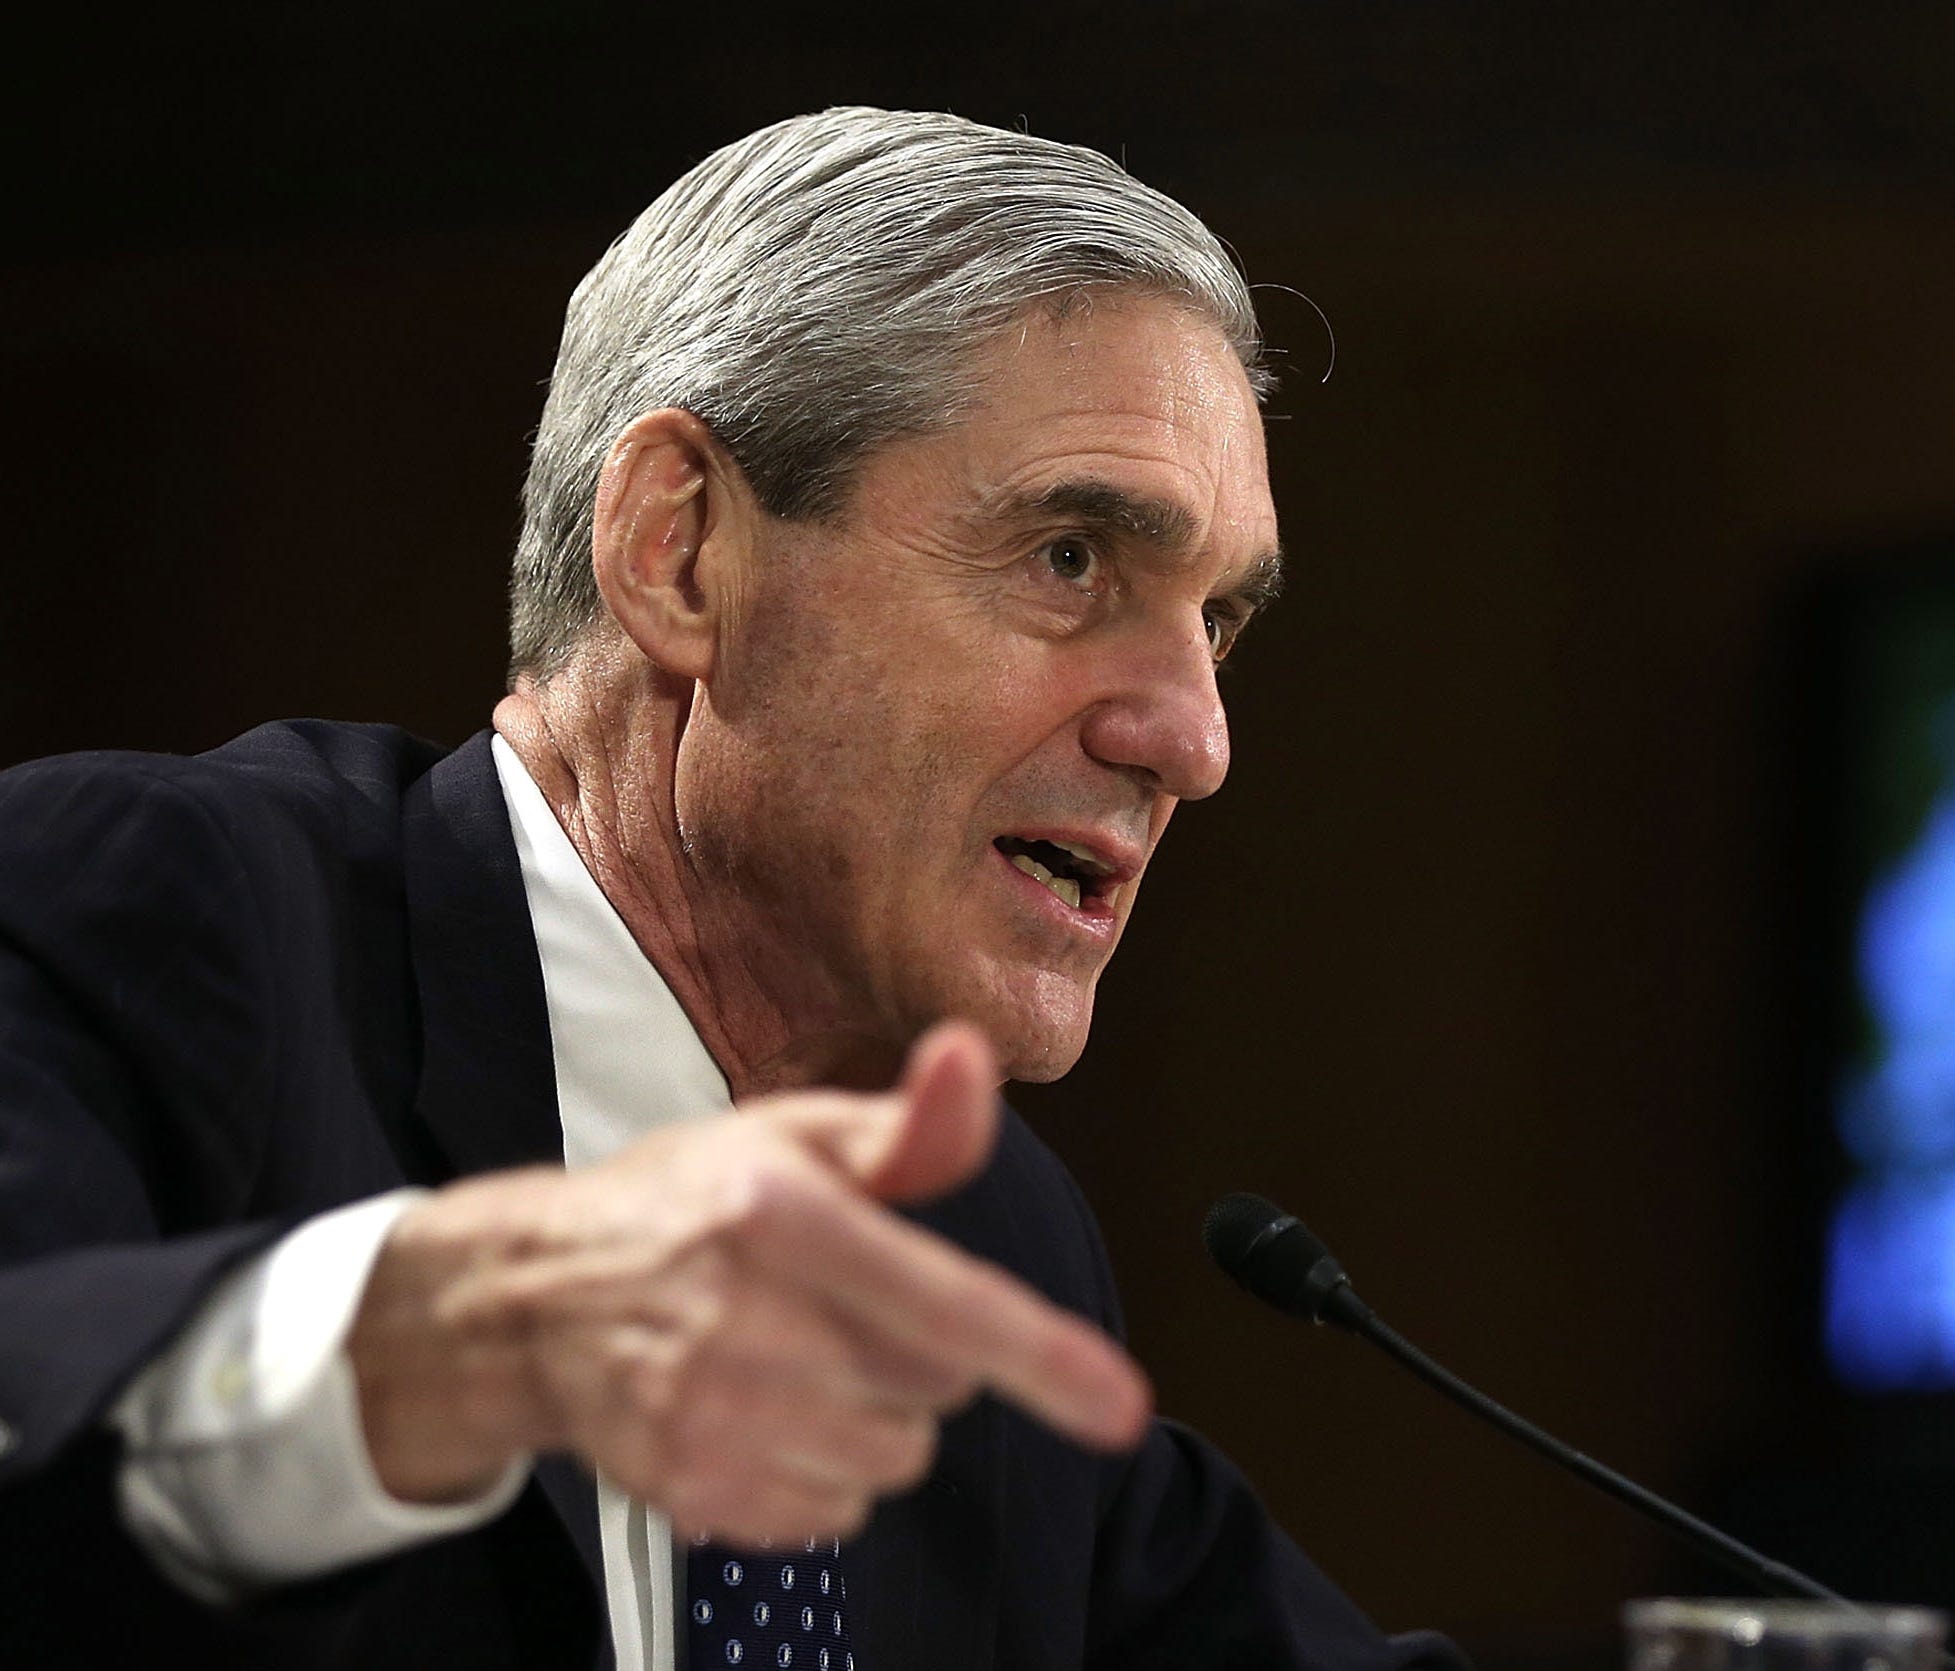 Then-FBI Director Robert Mueller testifies during a hearing before the Senate Judiciary Committee on Capitol Hill in Washington, on June 19, 2013.